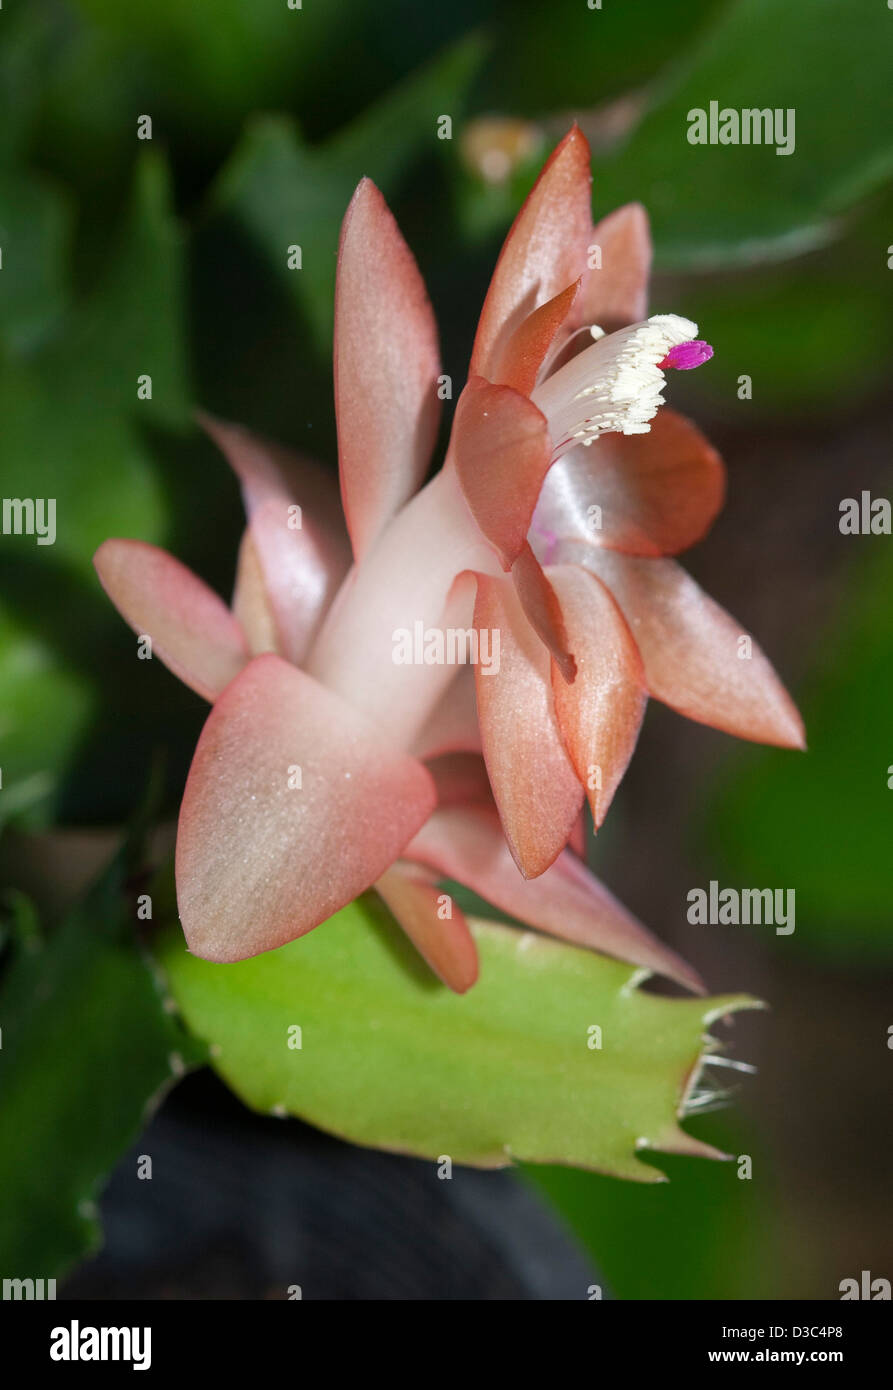 Beautiful apricot coloured flower and leaf of Zygocactus 'Orange Delight' against a background of dark green foliage Stock Photo